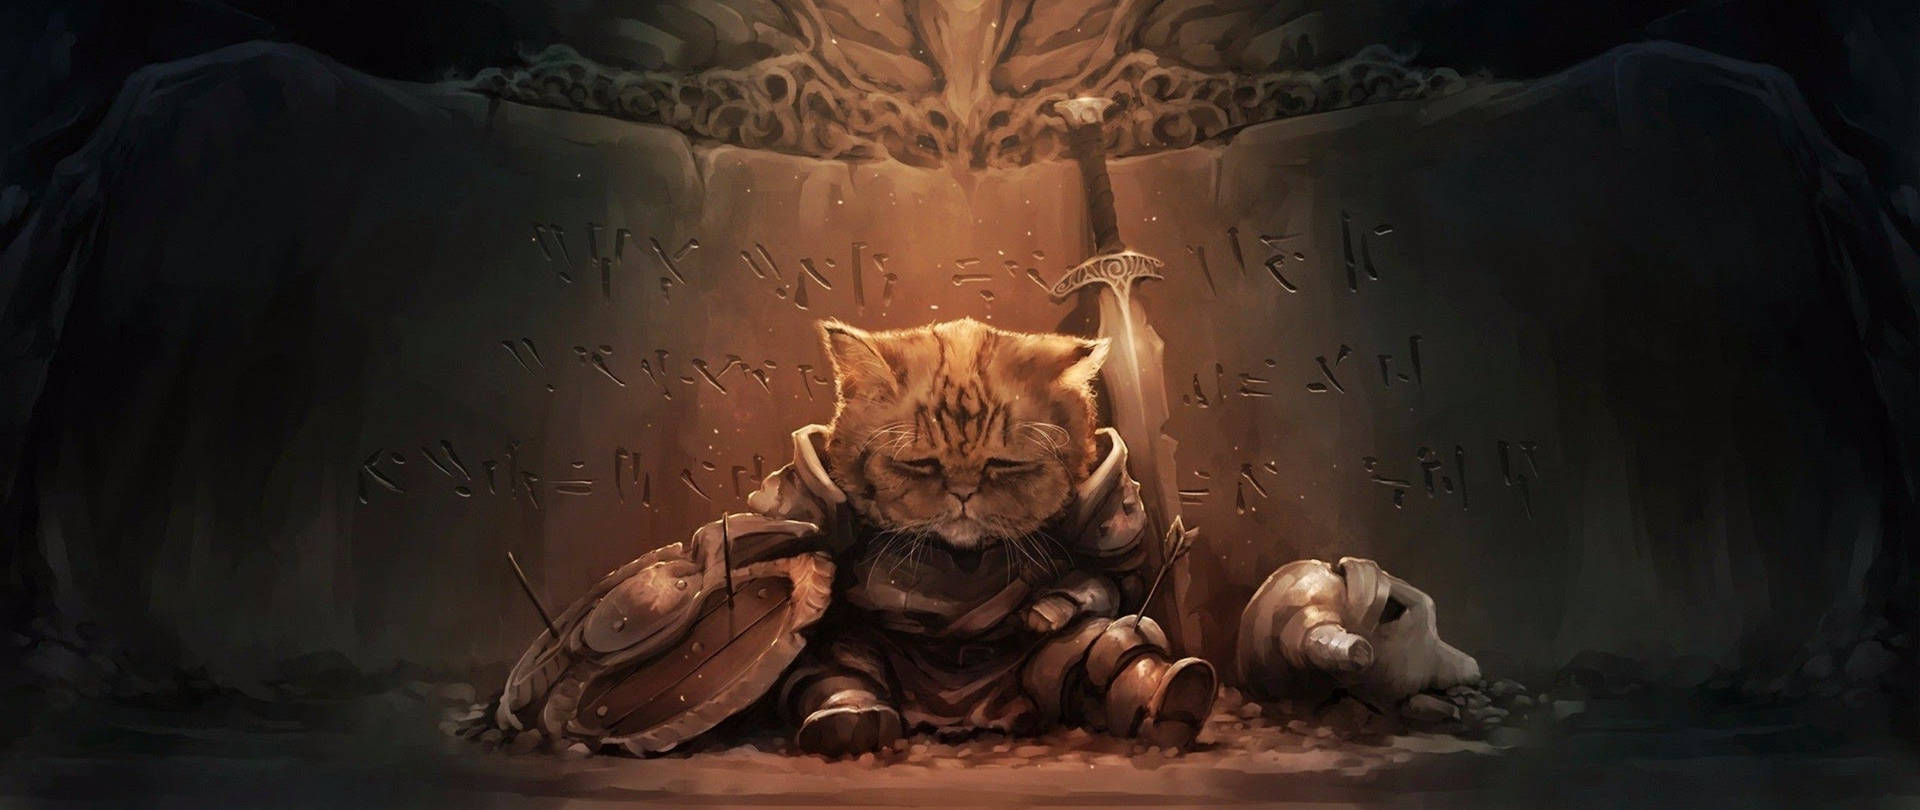 Cat Art Warrior With Shield Background